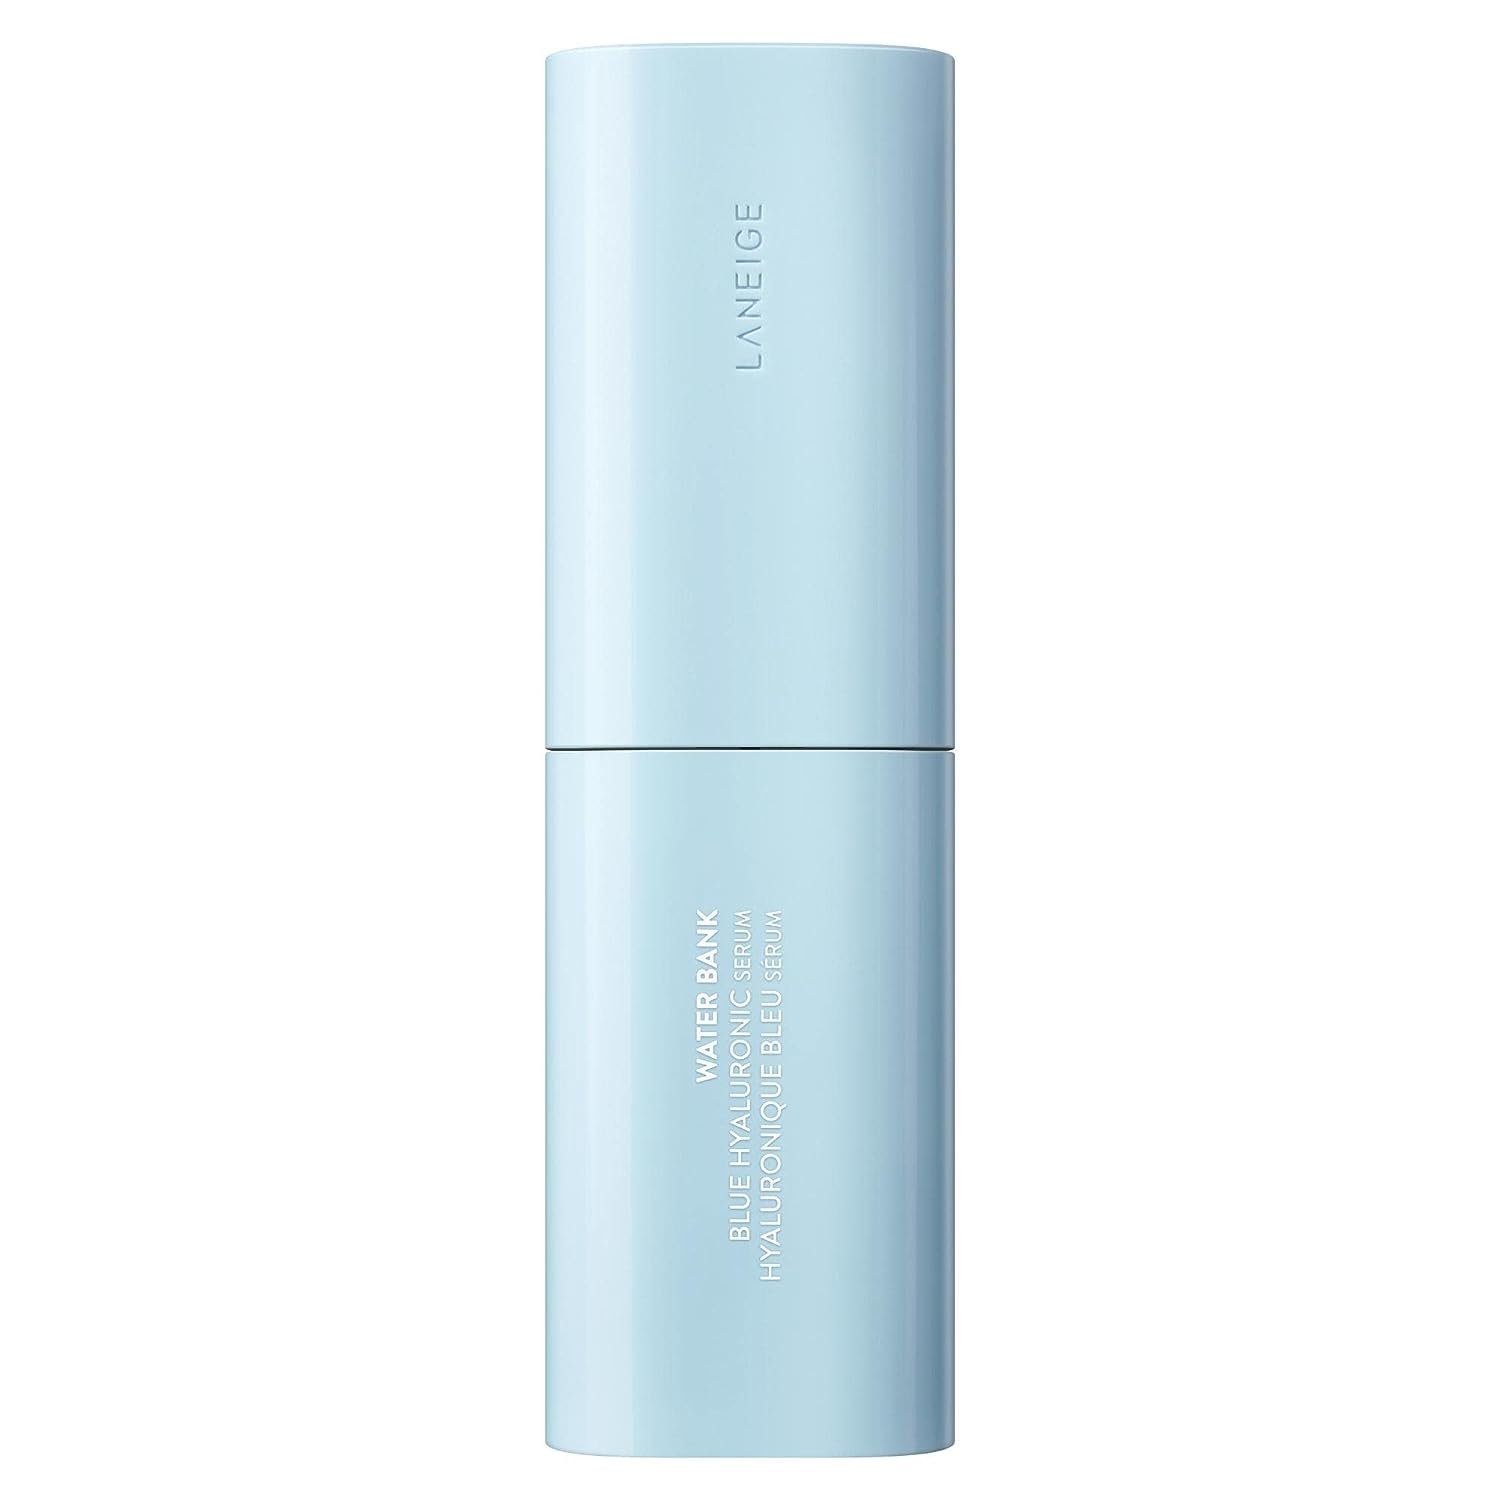 LANEIGE Water Bank Blue Hyaluronic Serum: Hydrate and Visibly Soothe